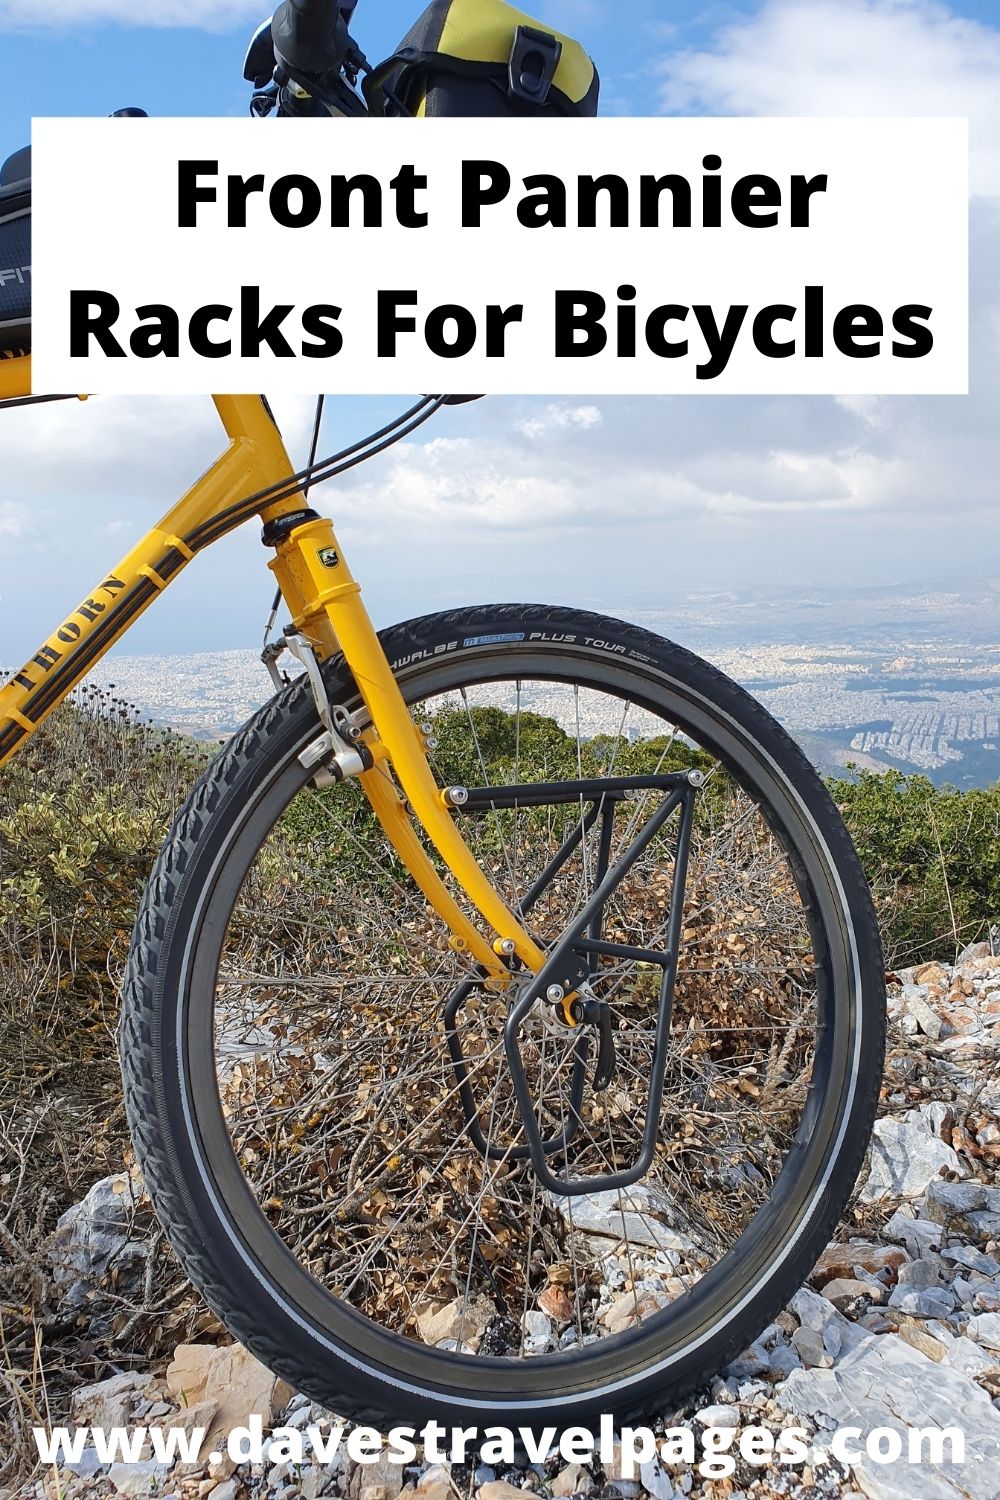 A guide to front pannier racks for bicycles